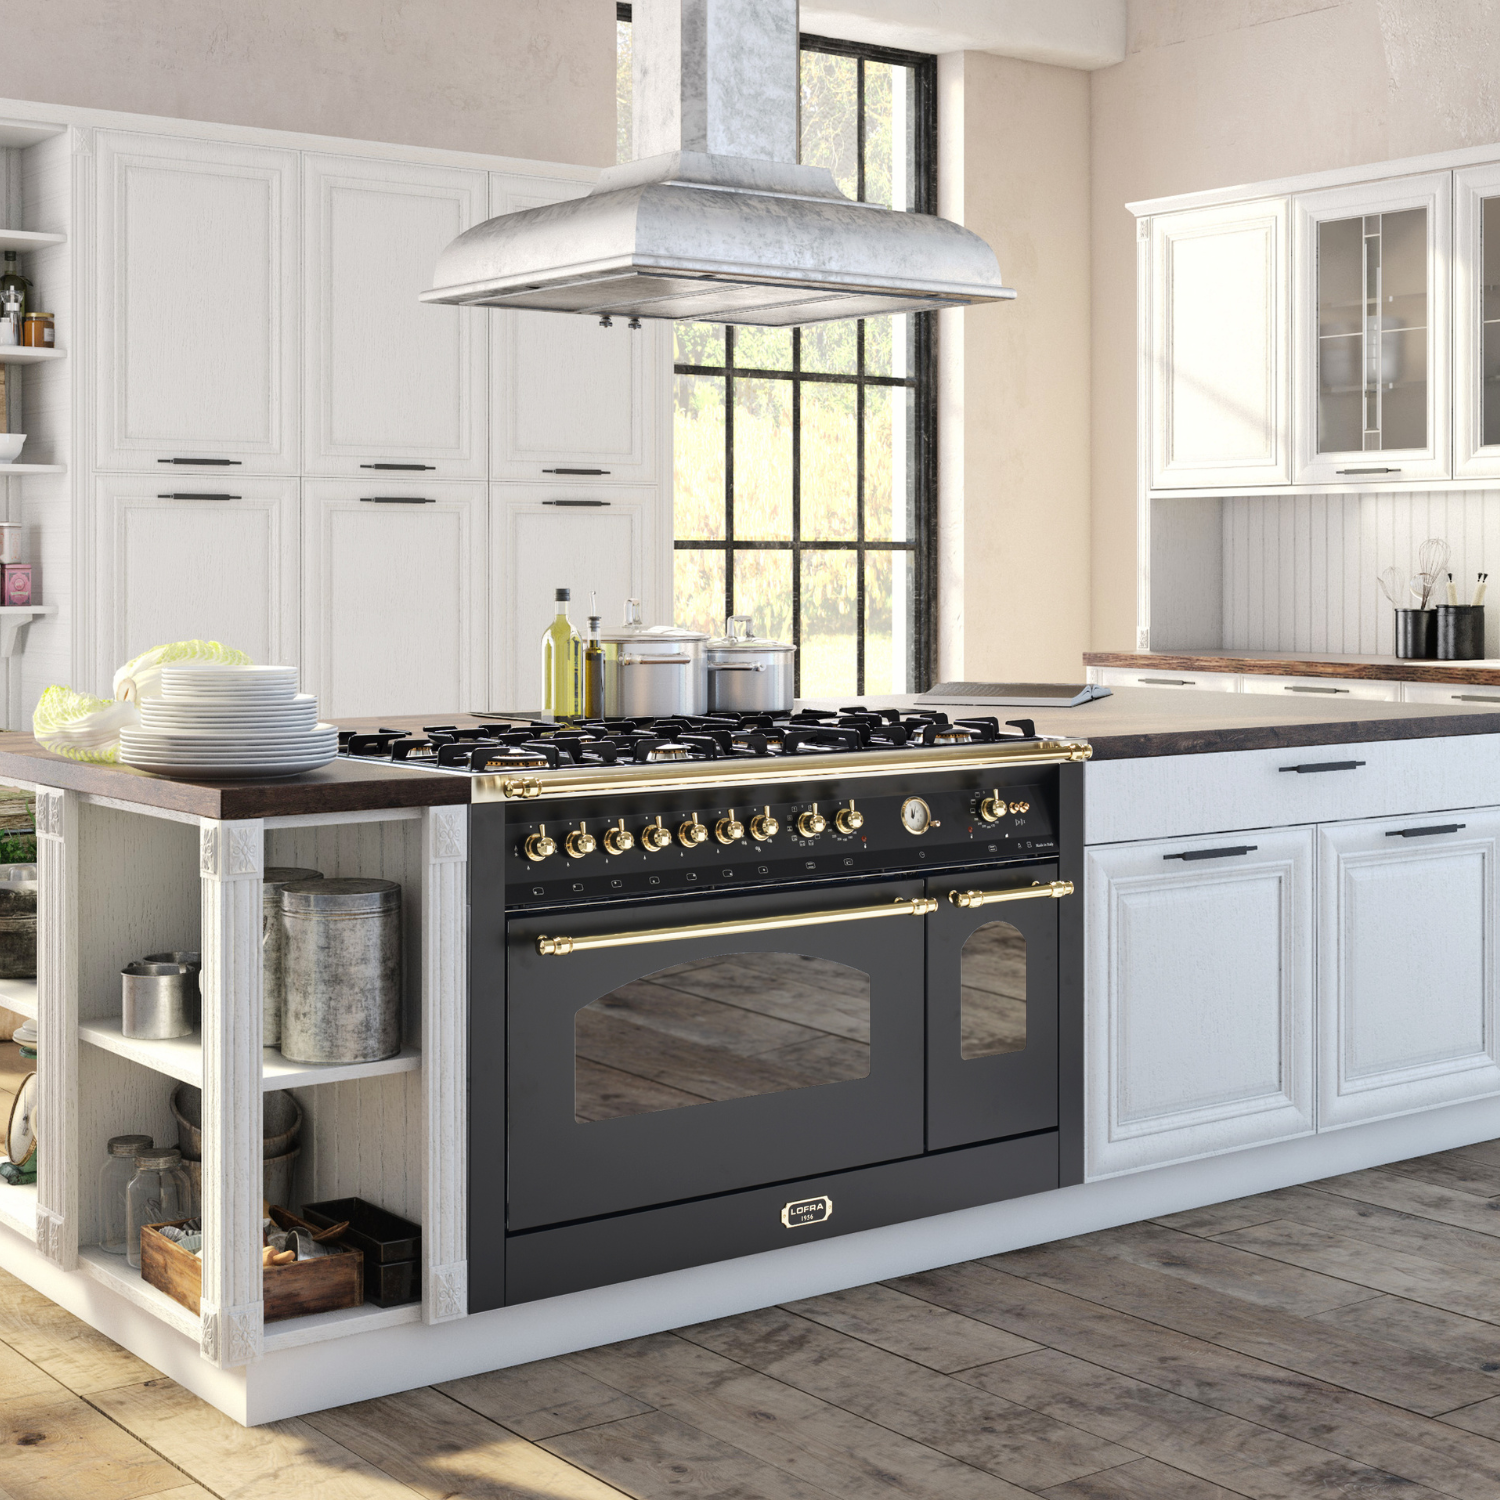 Dolcevita_1d607f32-abfb-474d-a3a6-0c9c7b331125 - Lofra Cookers